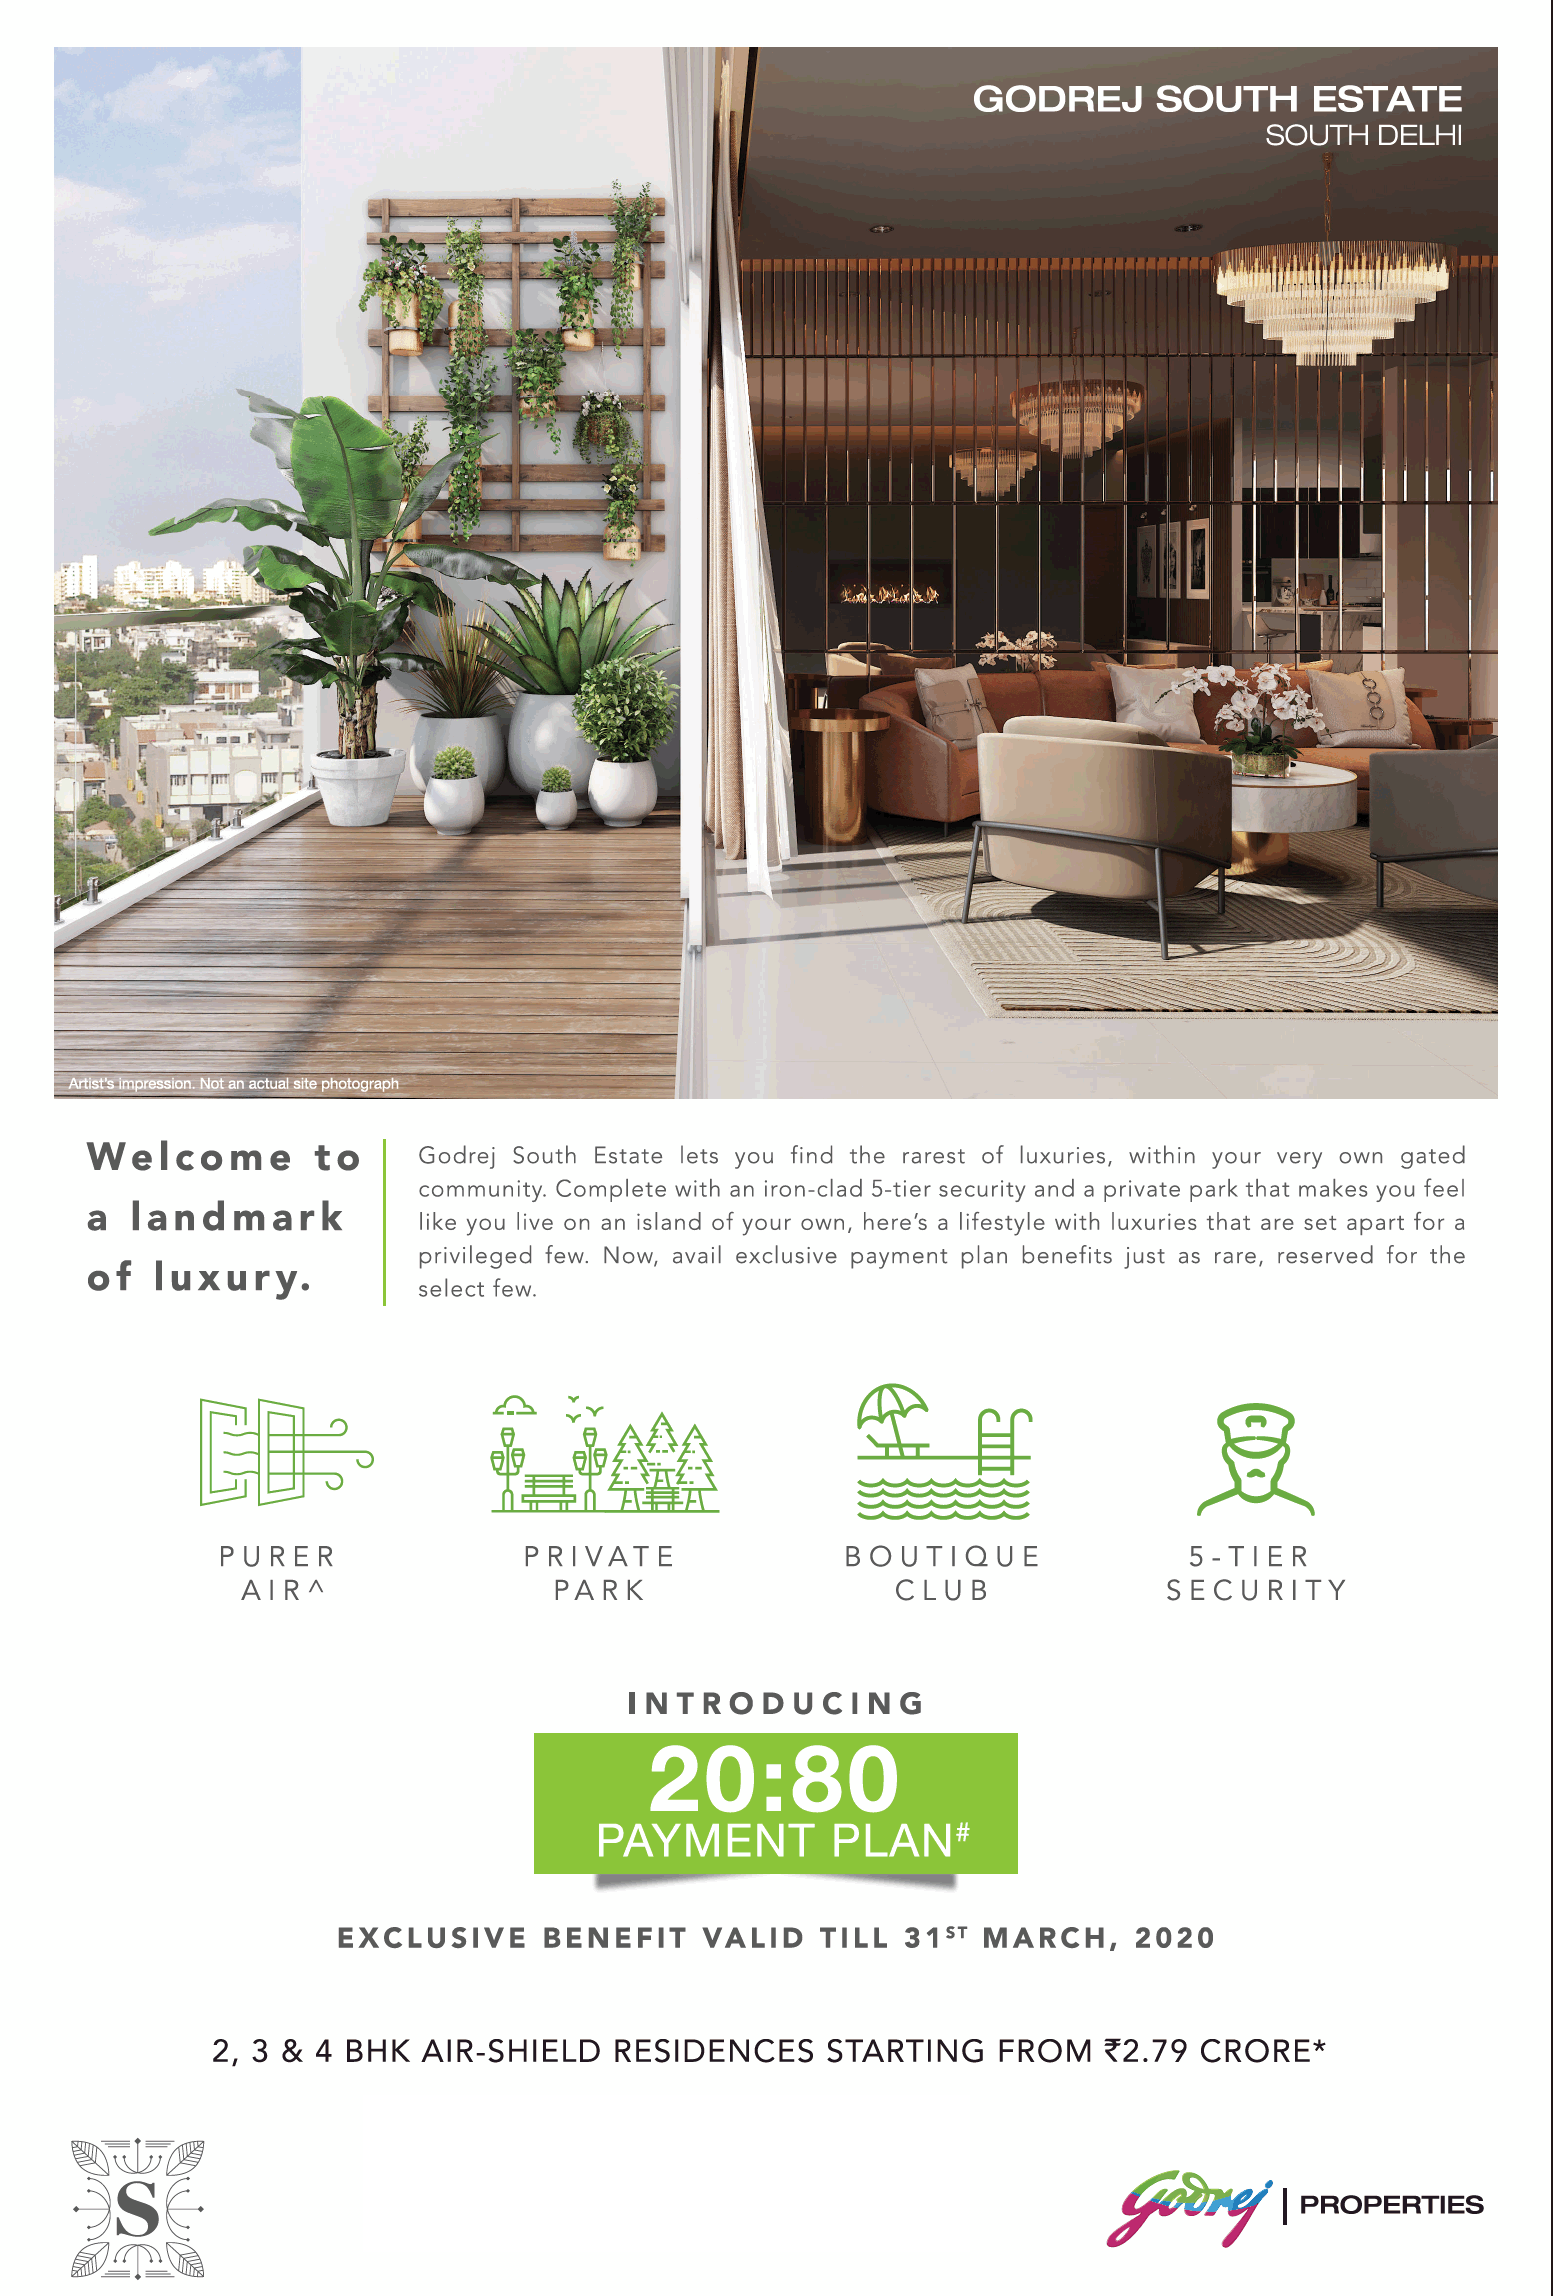 2, 3 and 4 BHK air-shield residences starting from Rs 2.79 Cr at Godrej South Estate in New Delhi Update